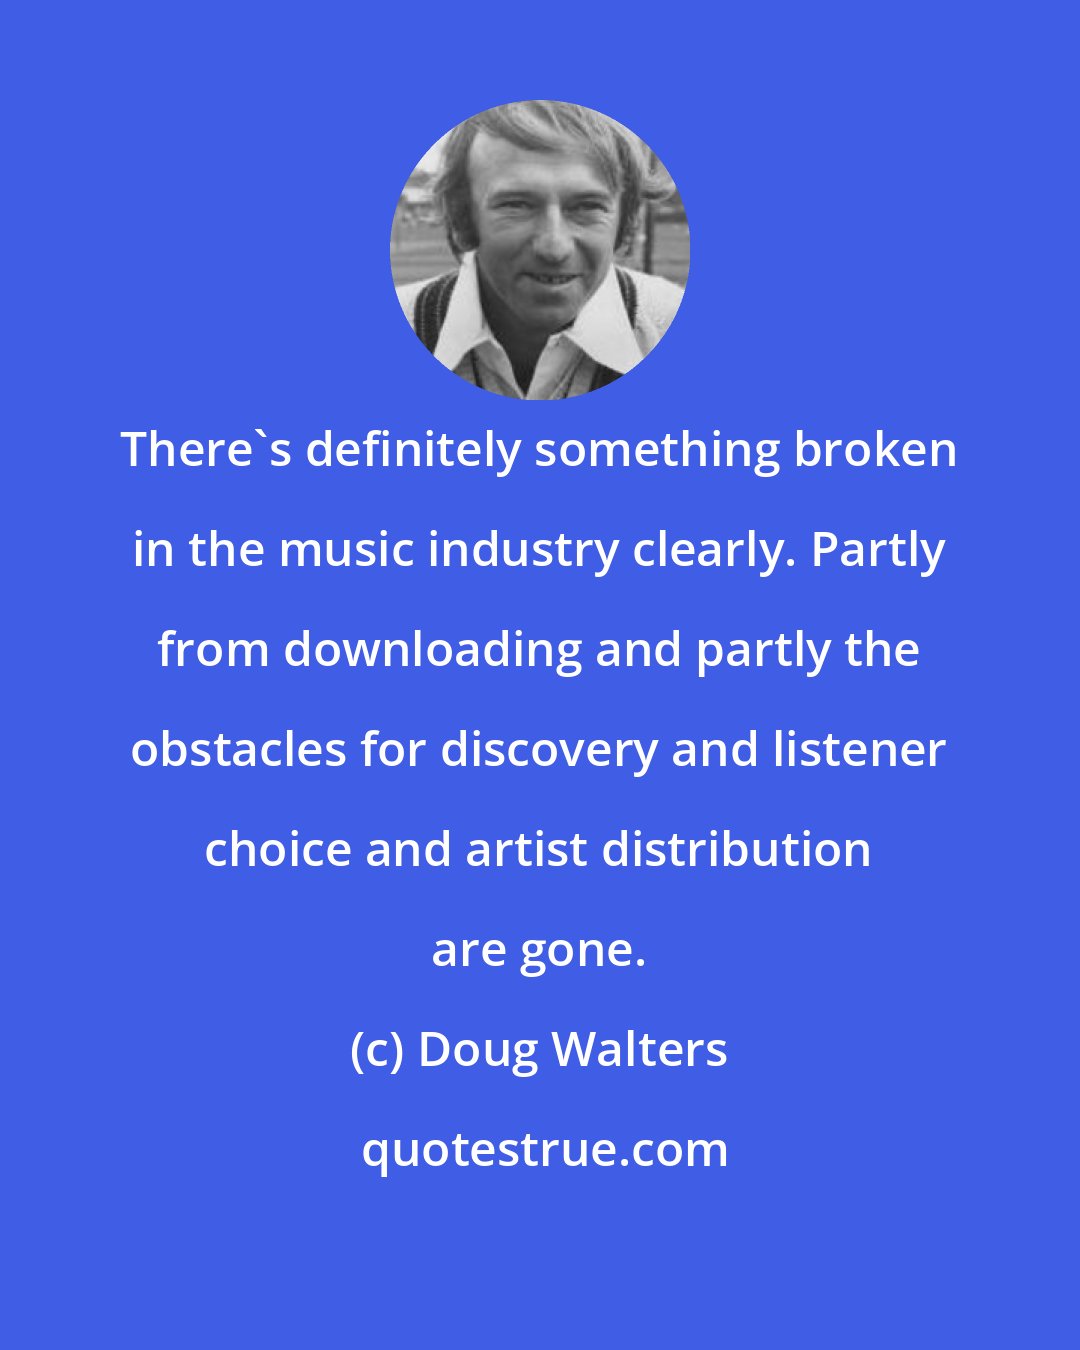 Doug Walters: There's definitely something broken in the music industry clearly. Partly from downloading and partly the obstacles for discovery and listener choice and artist distribution are gone.